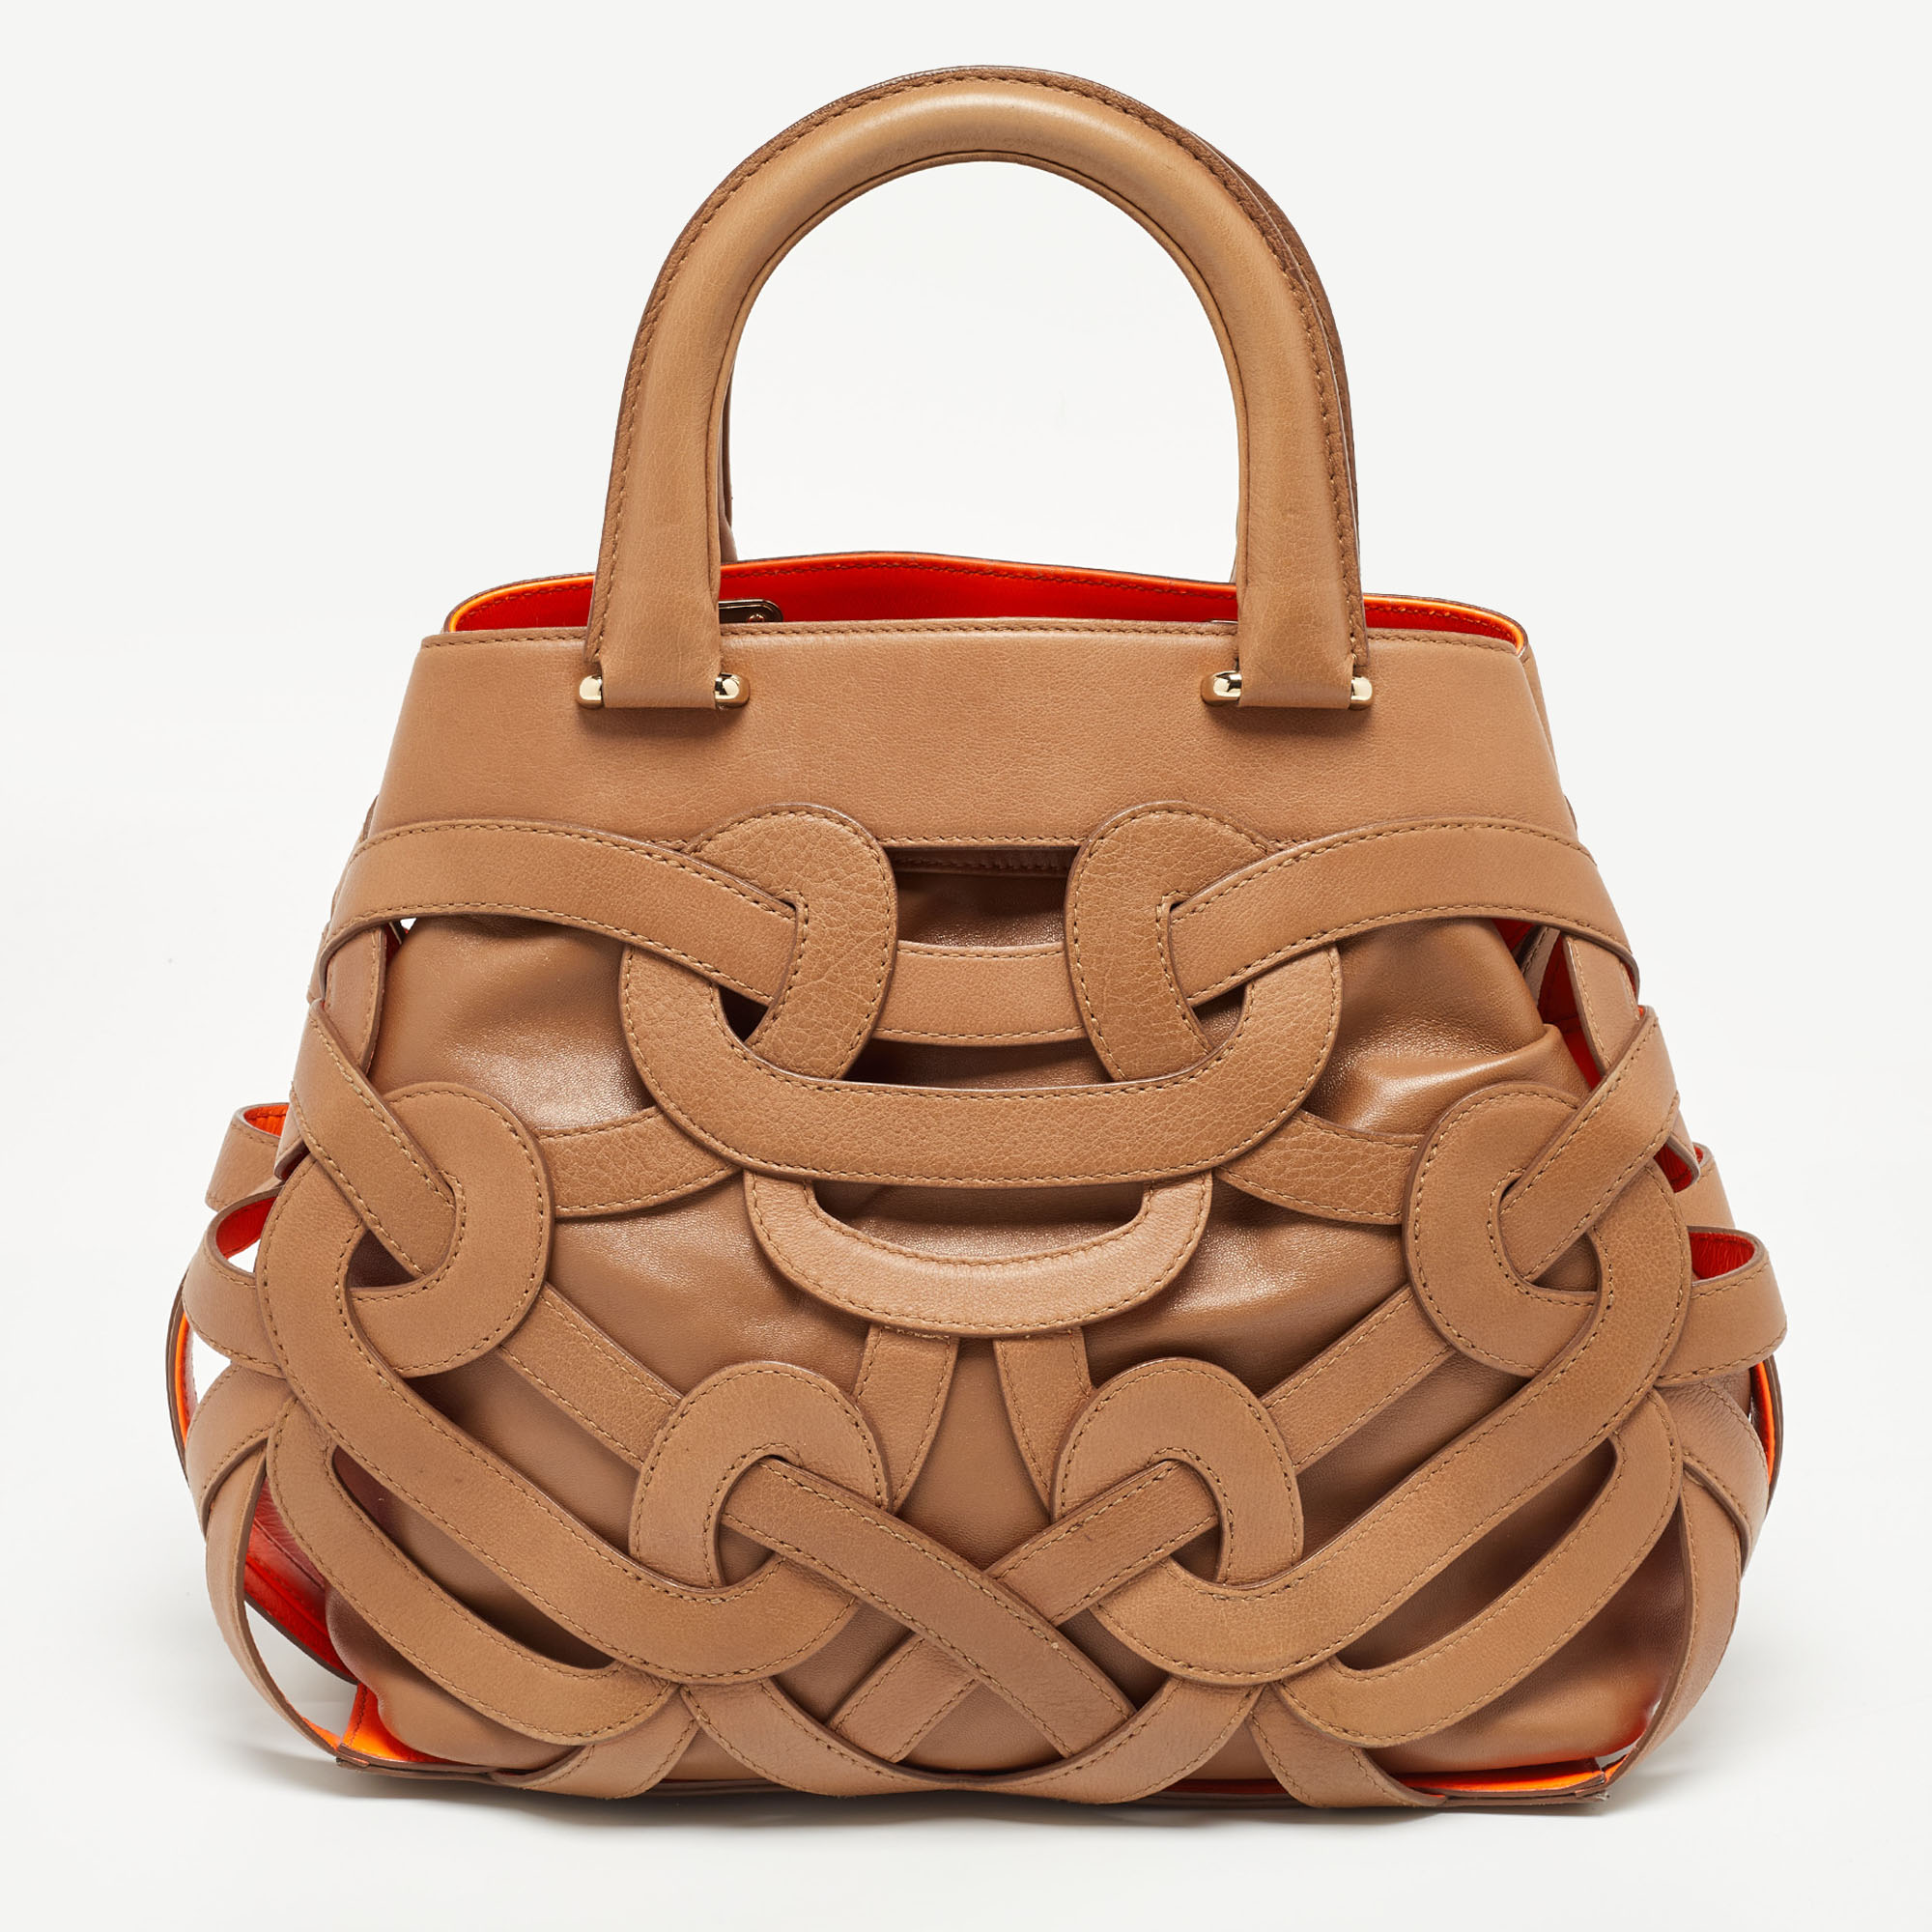 Bally Brown Strappy Leather Satchel